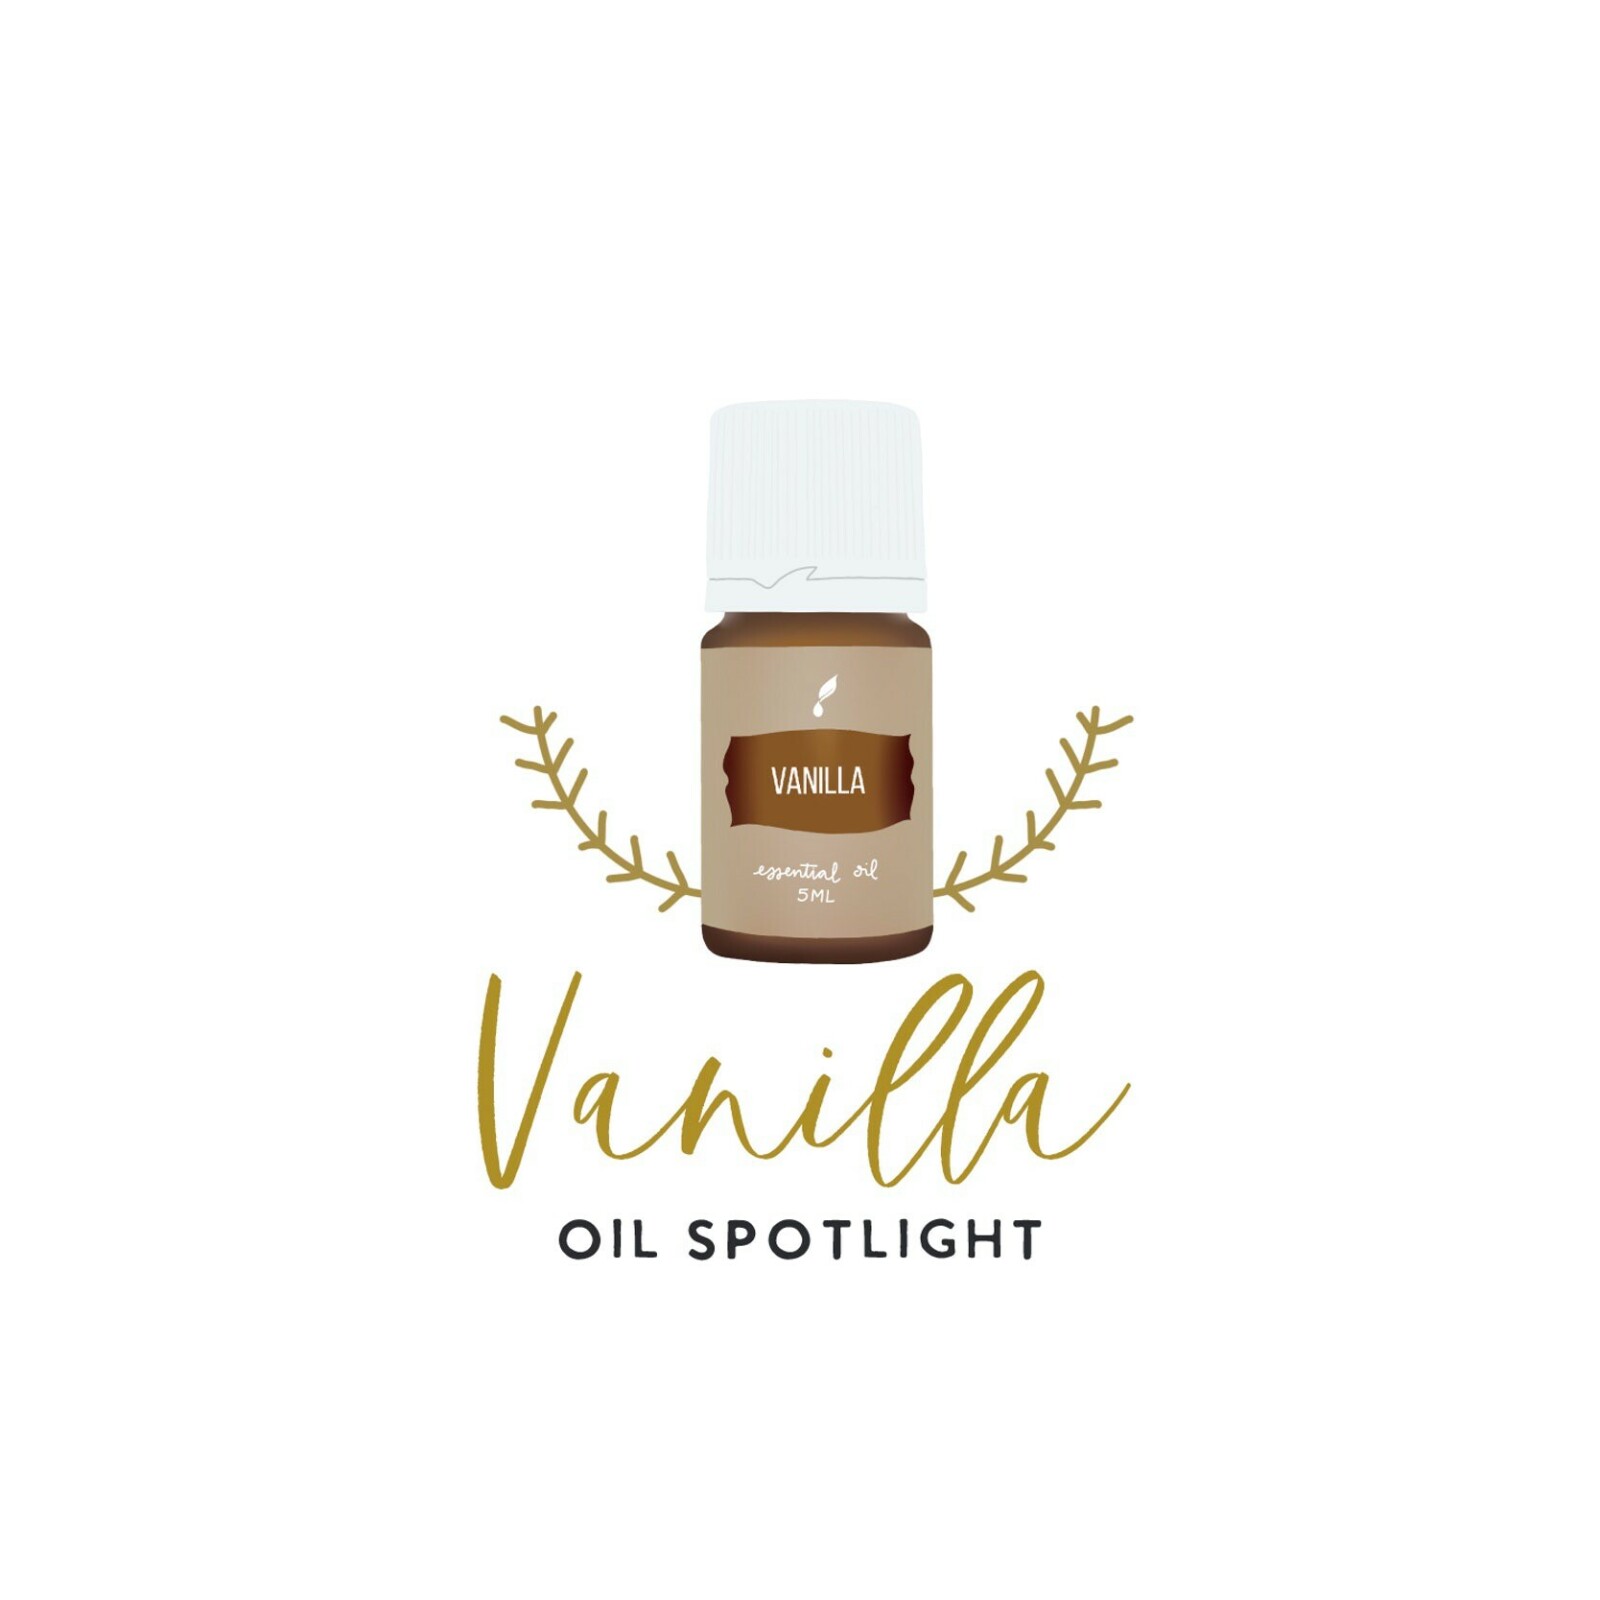 Vanilla is such a warm, inviting and happy oil.